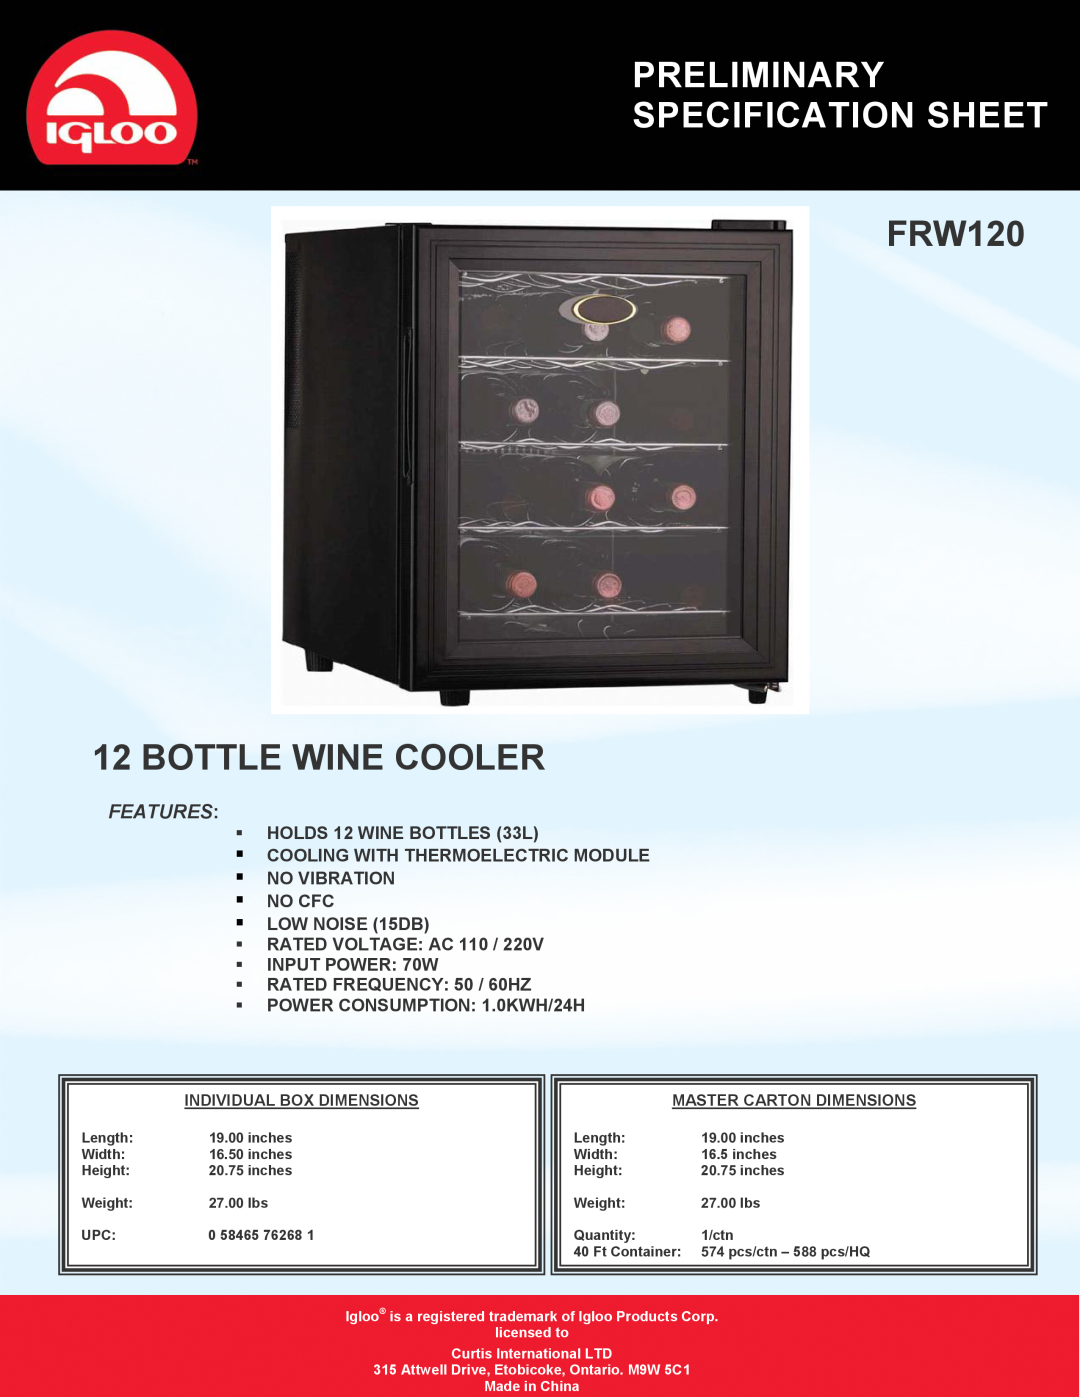 Igloo specifications Preliminary Specification Sheet, FRW120 12 BOTTLE WINE COOLER, Features, Individual Box Dimensions 